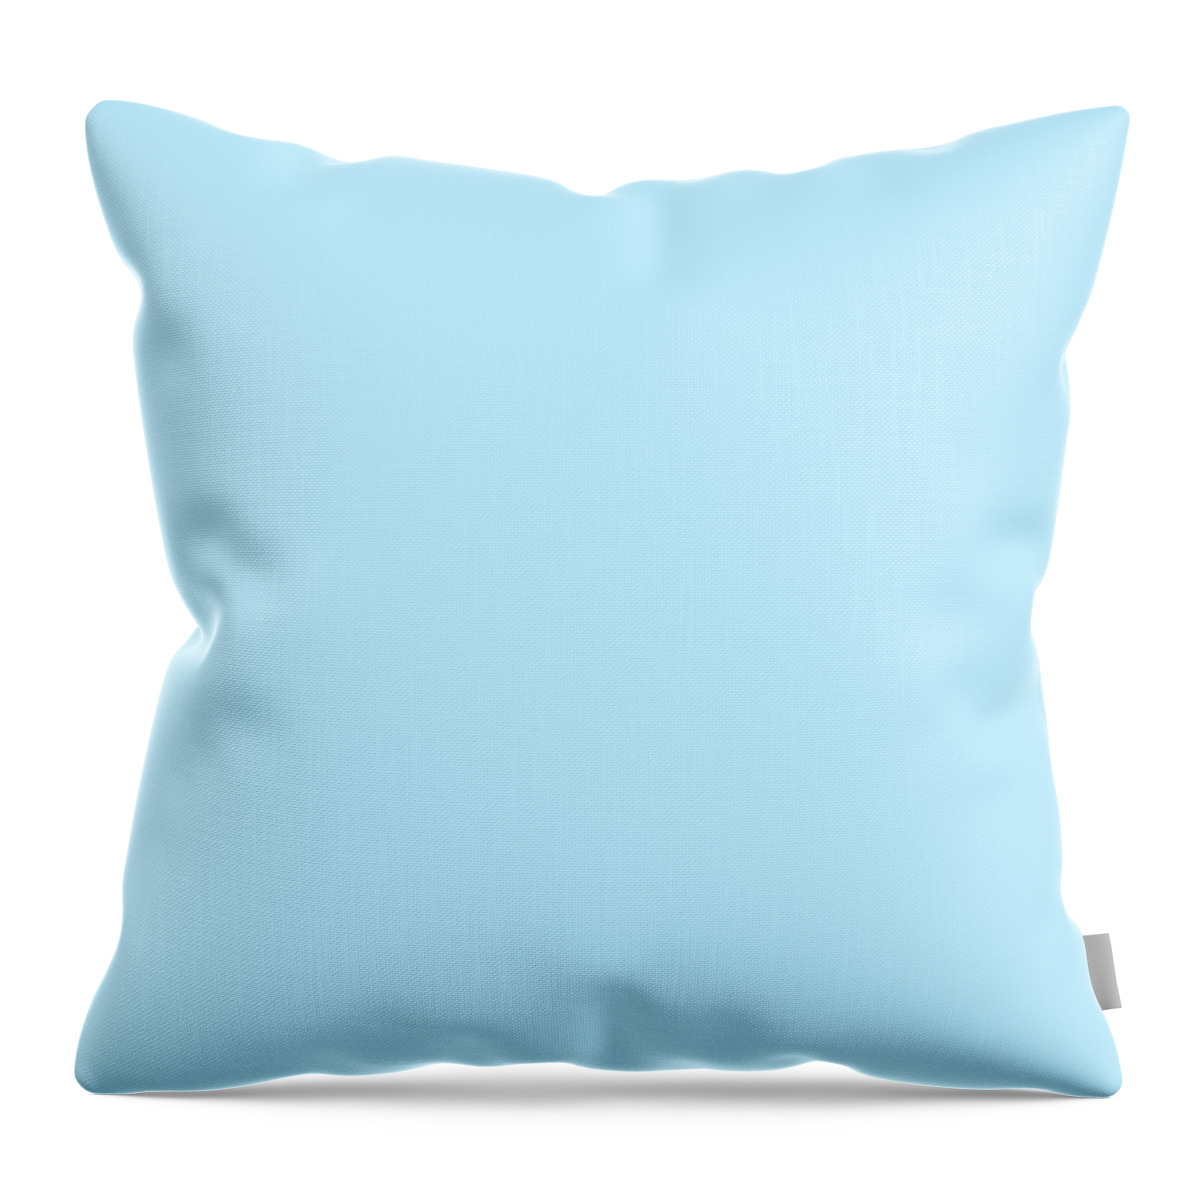 Robin Egg Blue Throw Pillow featuring the digital art Robin Egg Blue by TintoDesigns